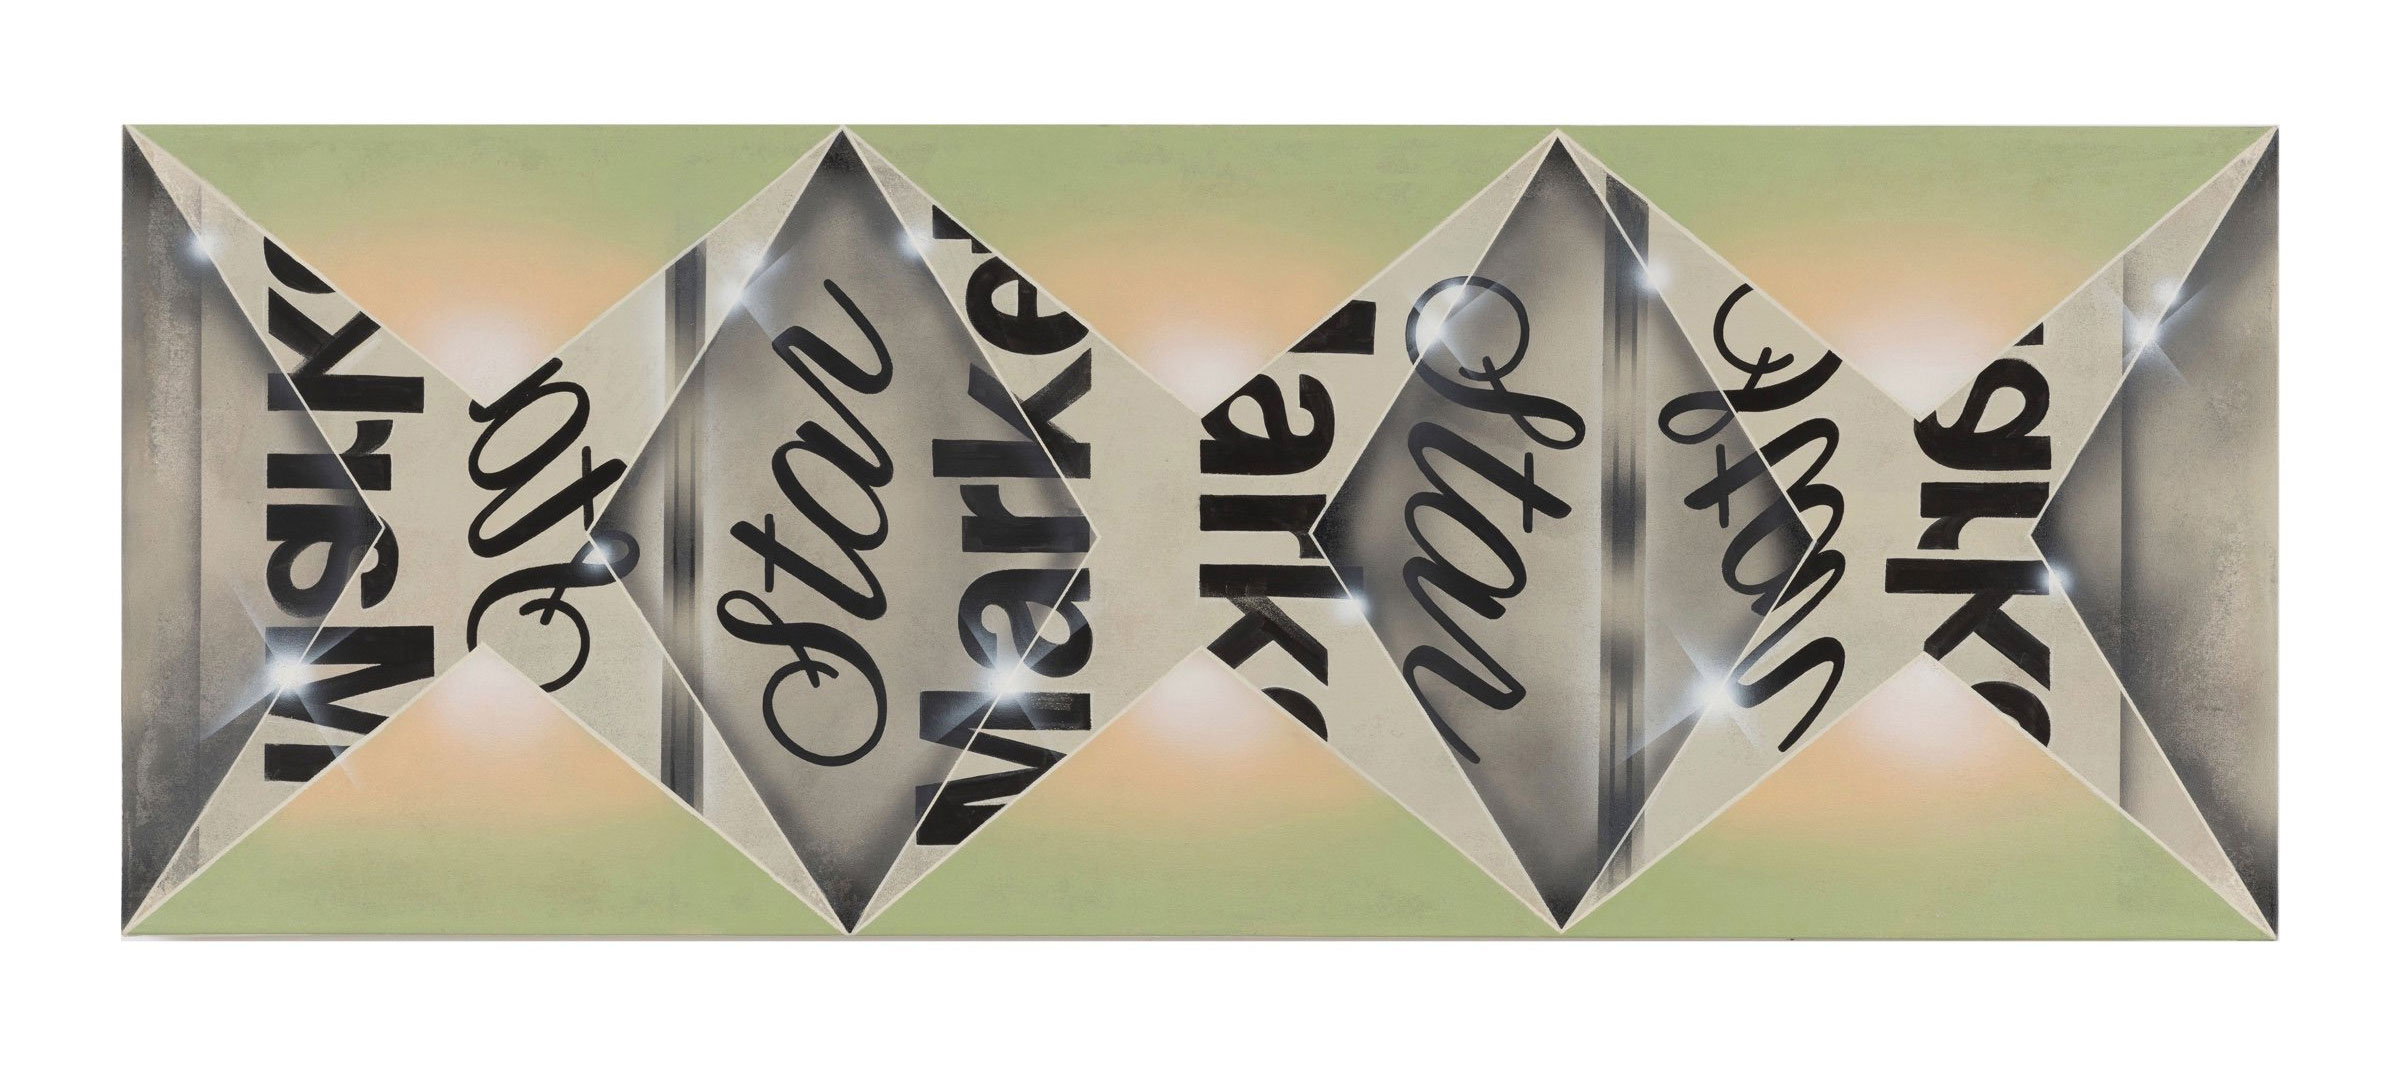 wide painting of diamond shapes with lettering "star market" reflected back and forth